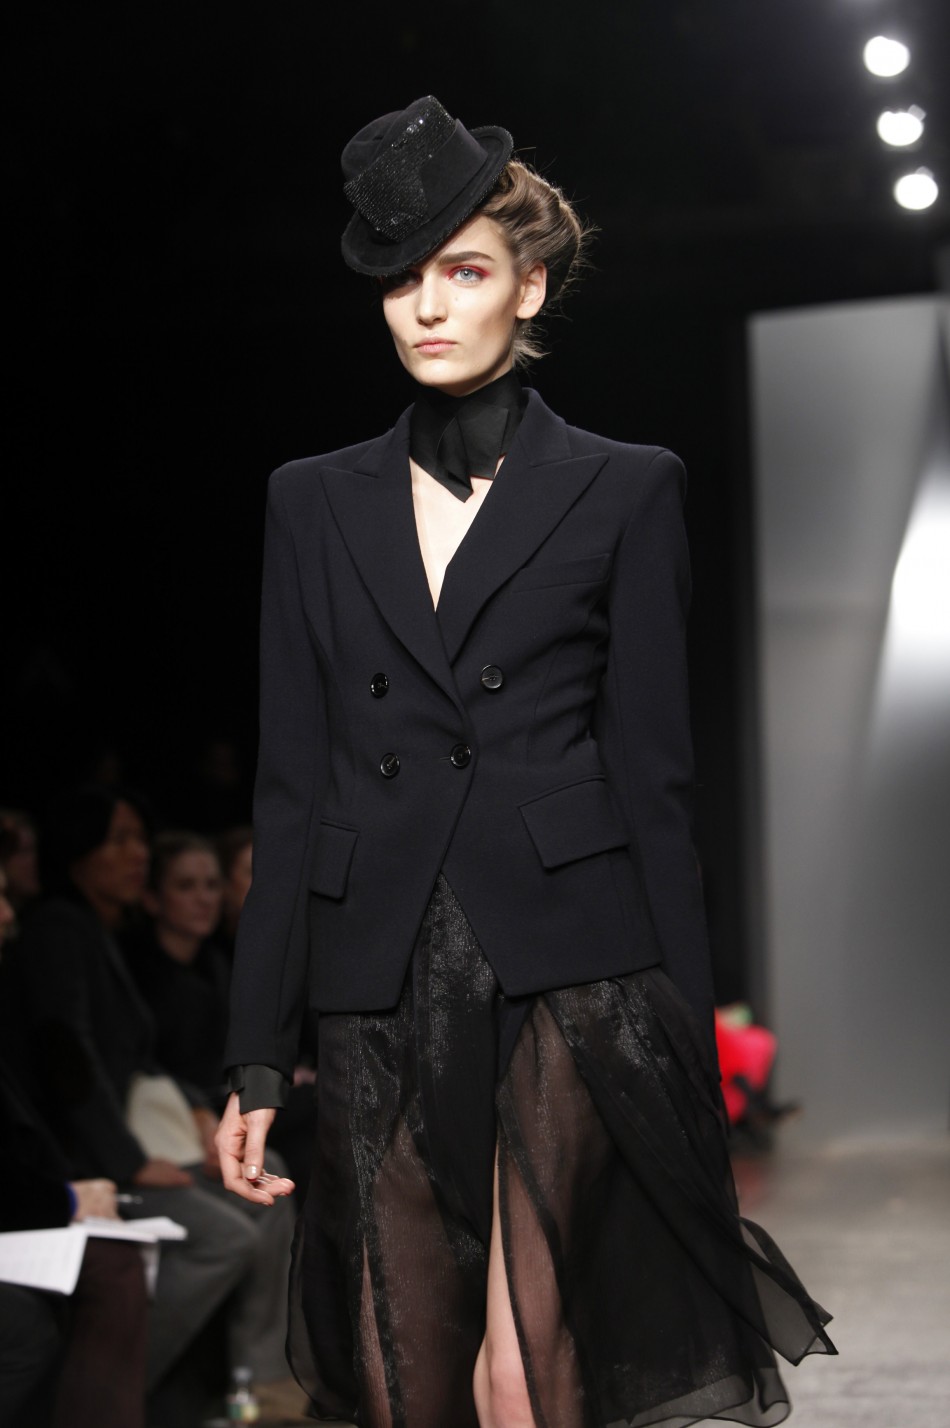 A model presents a creation at the Donna Karen New York FallWinter 2012 collection during New York Fashion Week